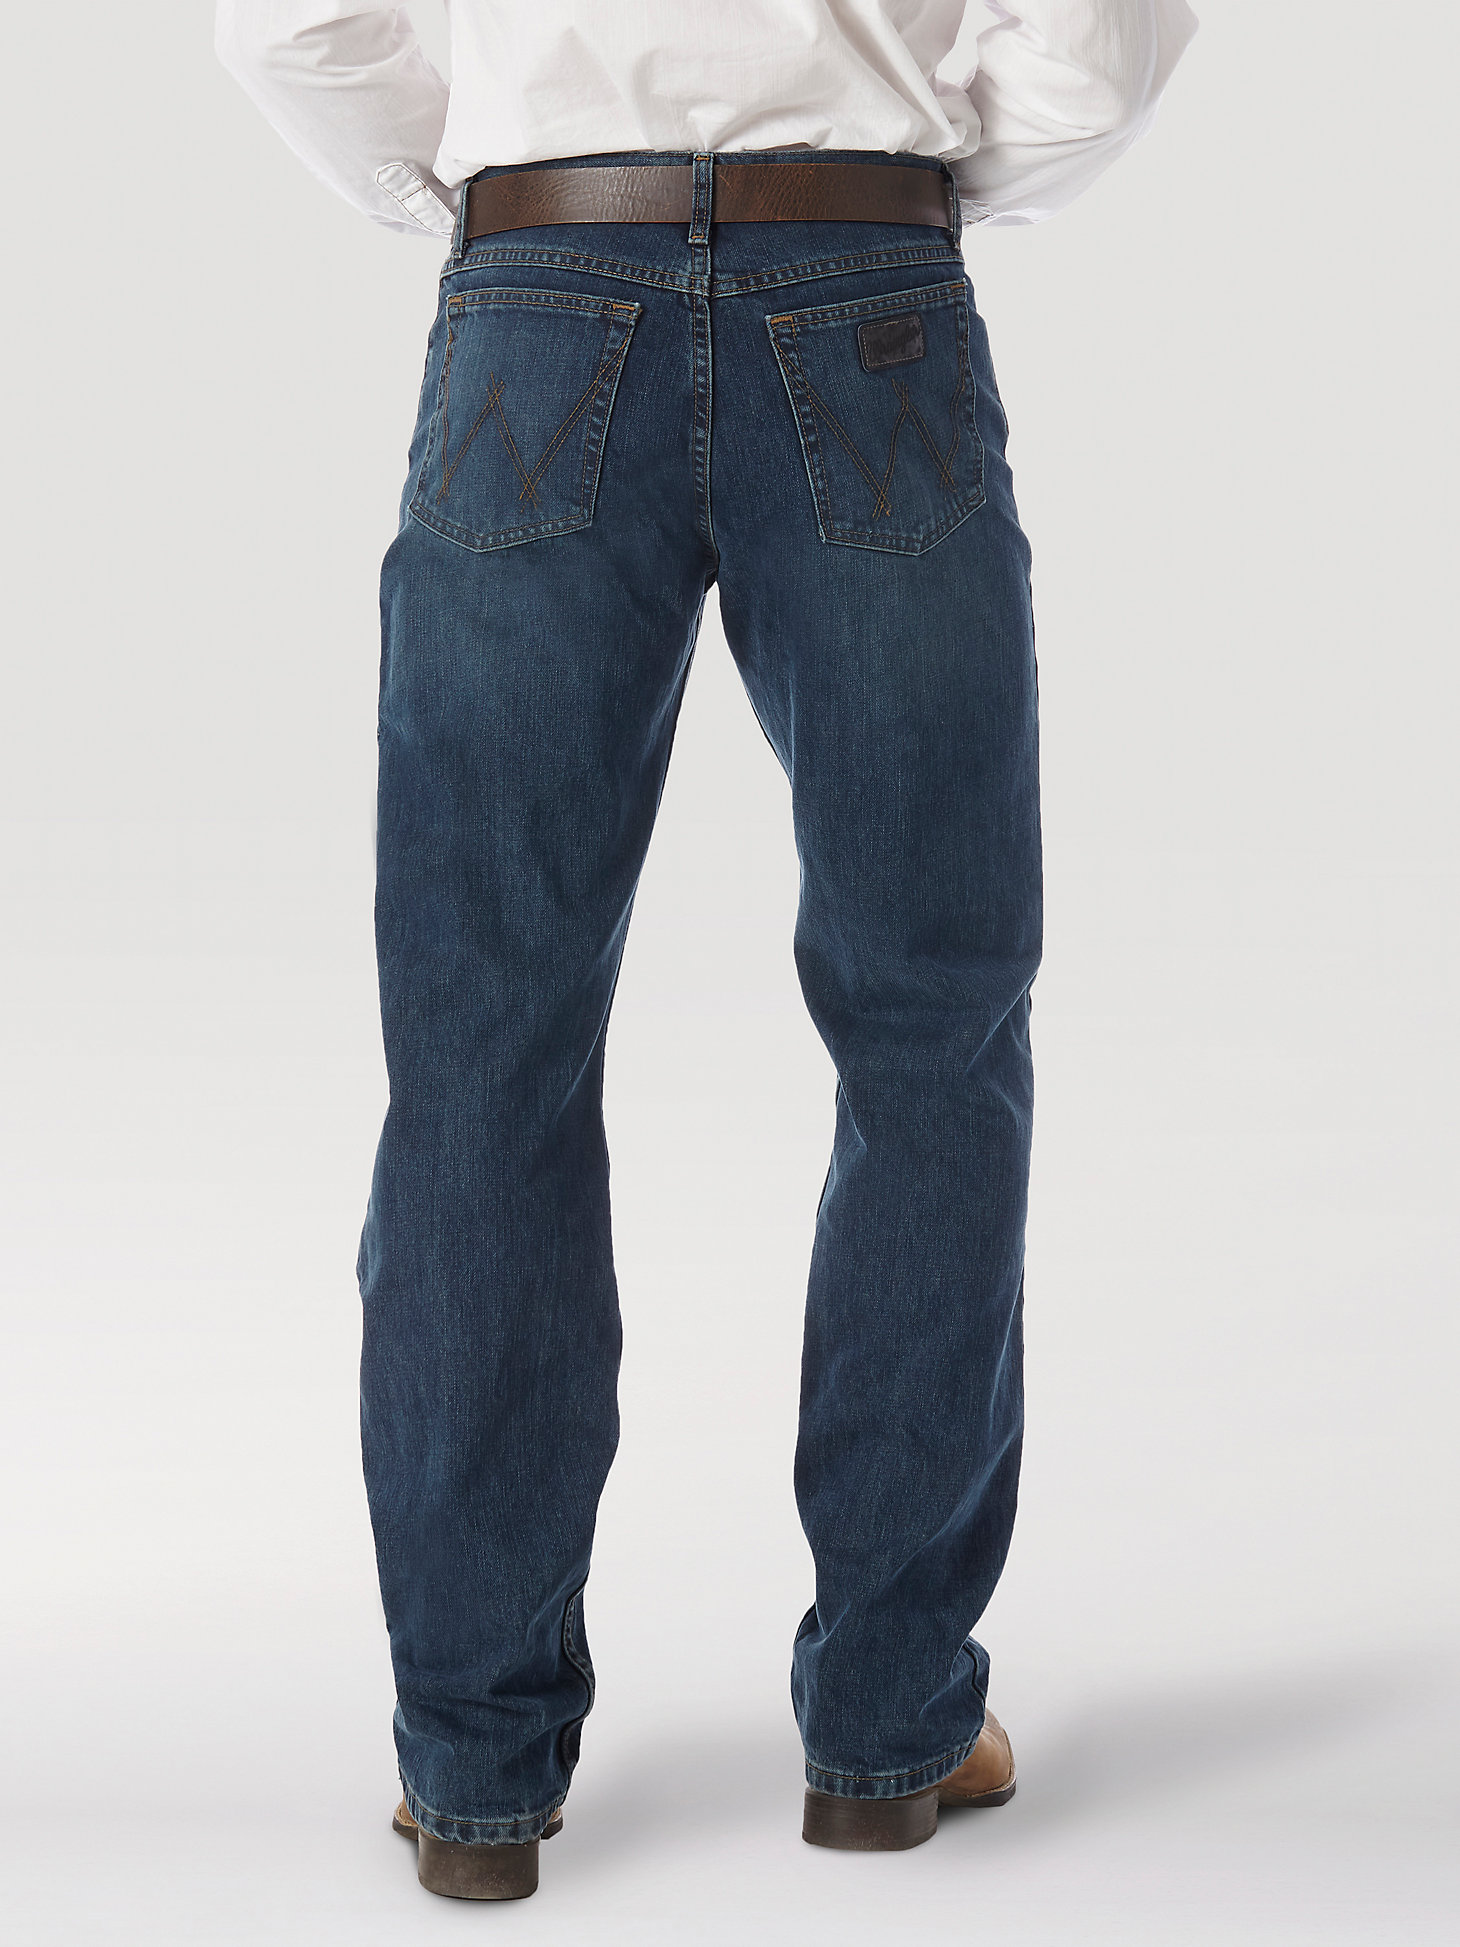 Wrangler® 20X® 01 Competition Jean in River Wash alternative view 2